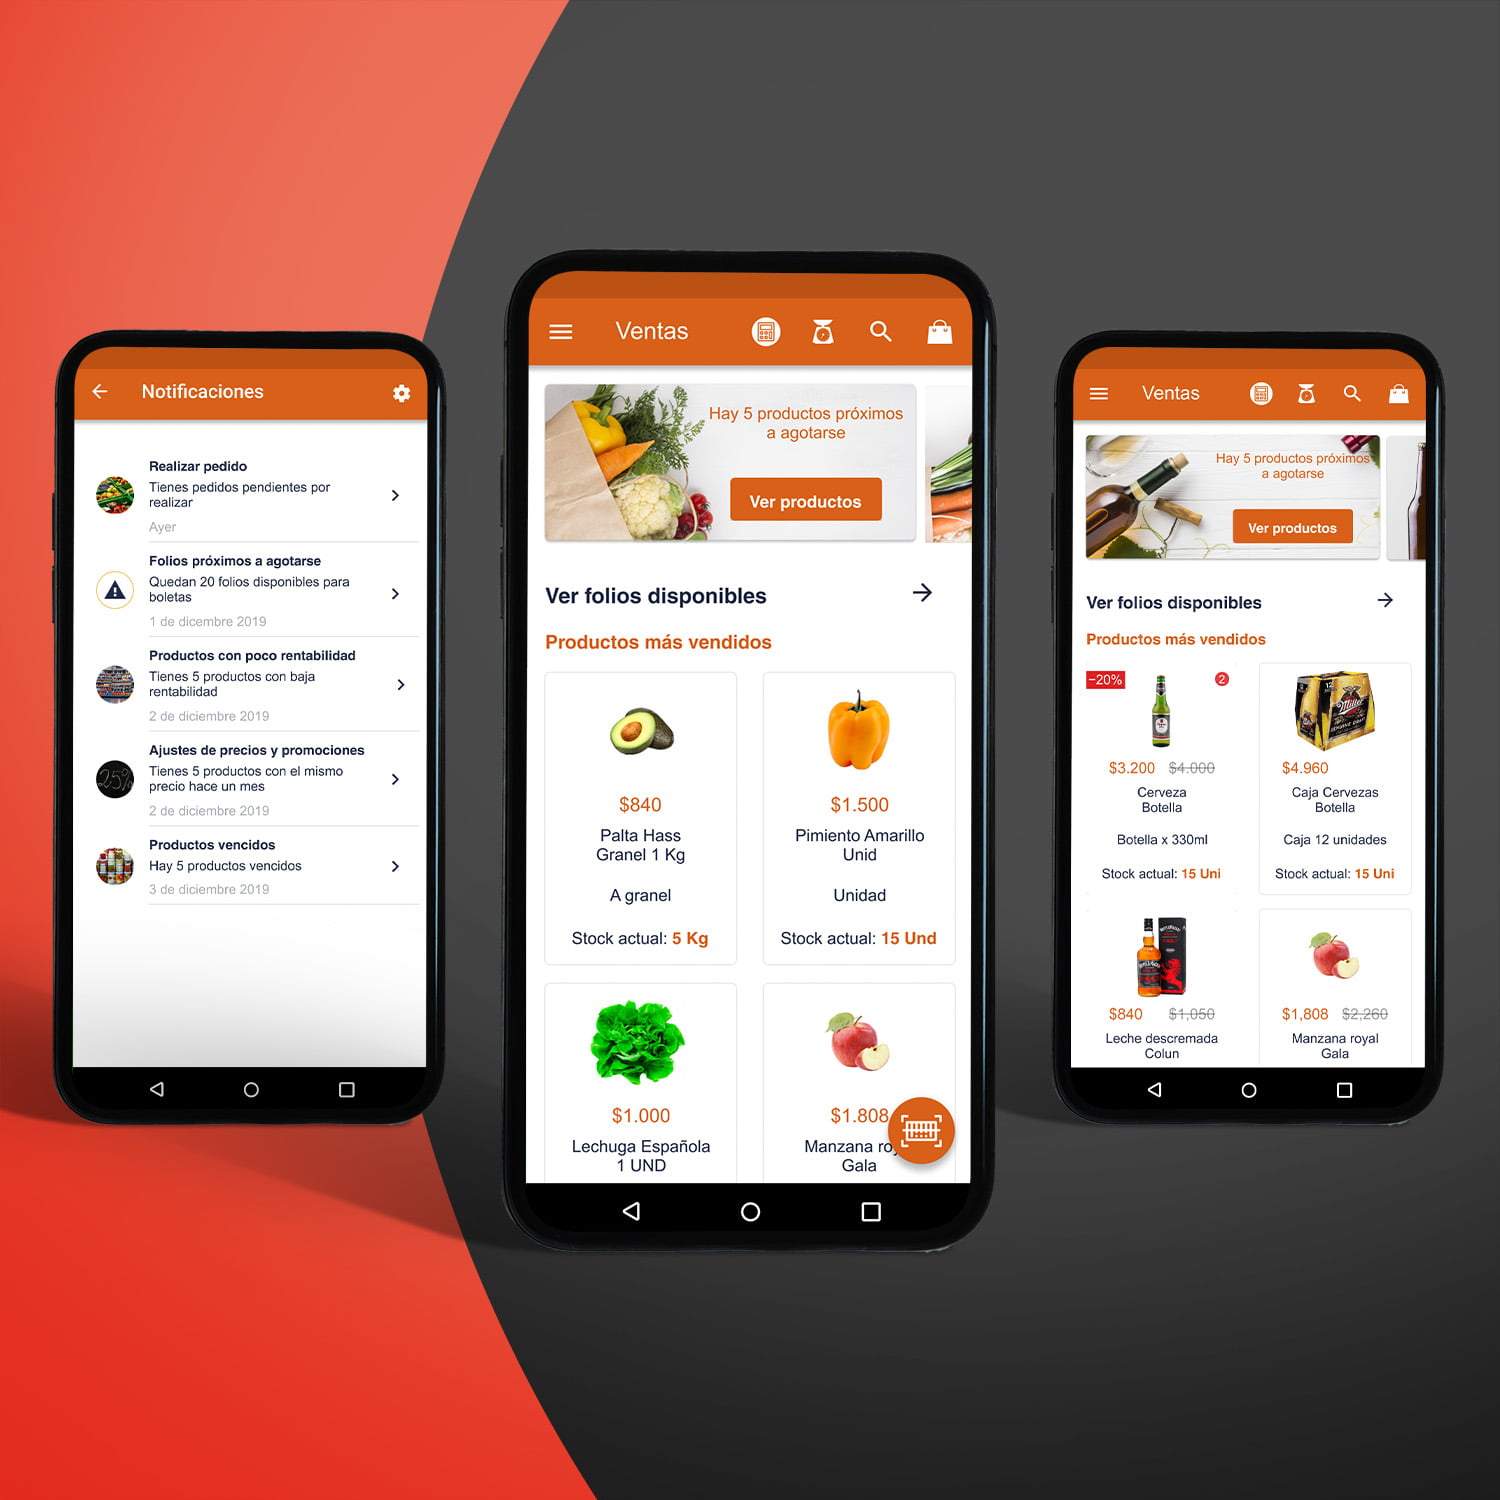 Mobile app for chile retailers, where they manage their entire retail business inventory, invoicing, prices, among other.